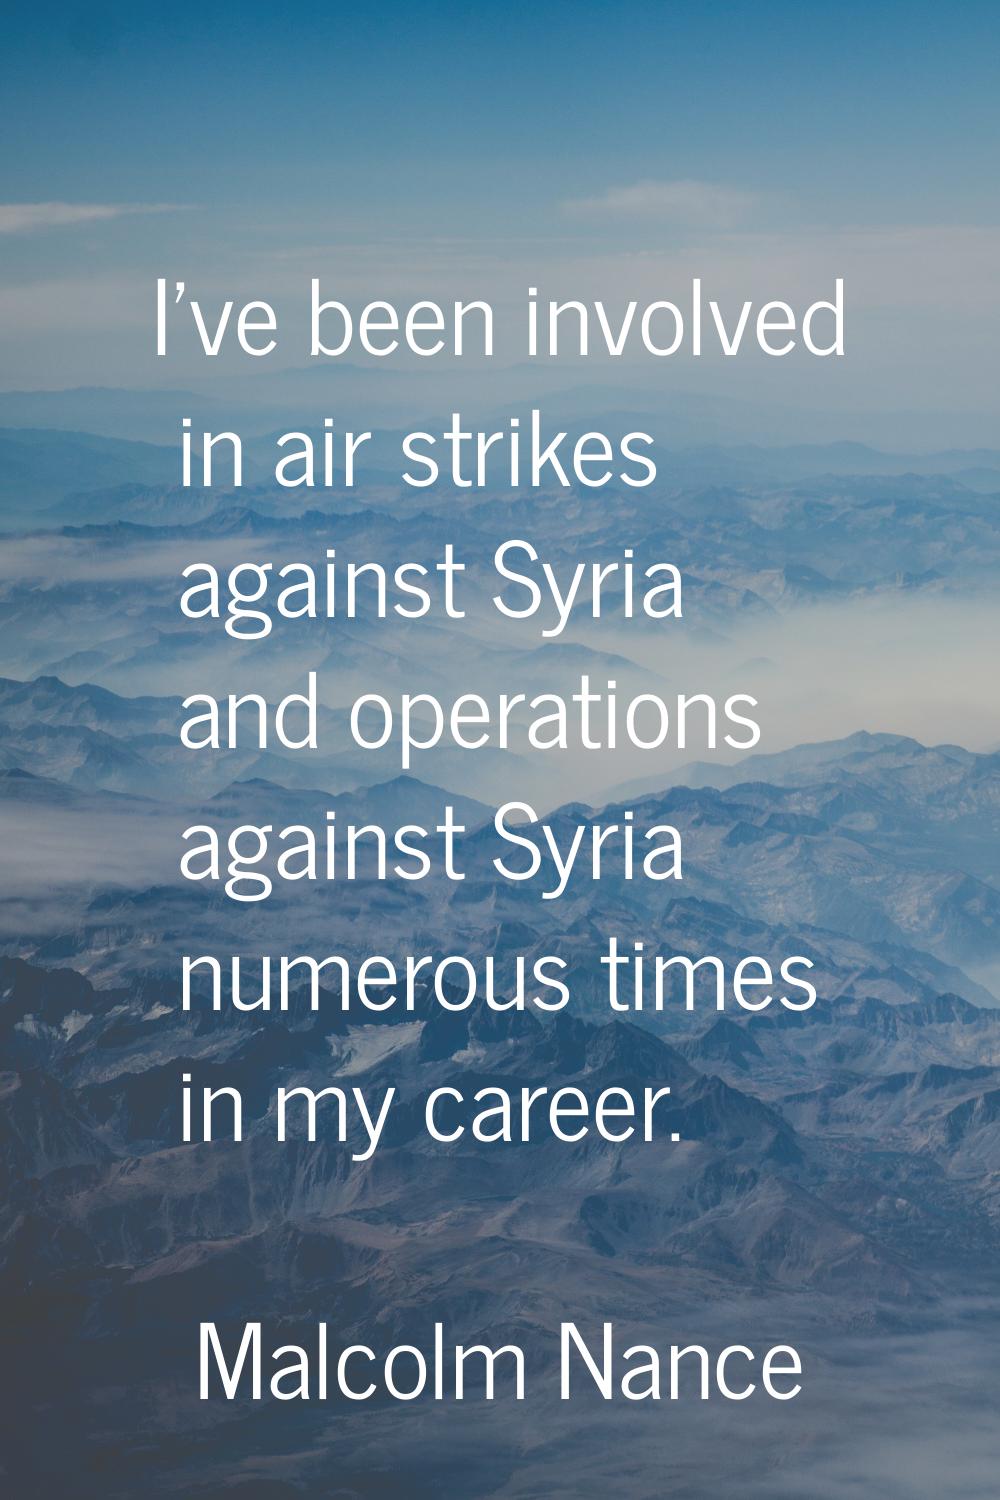 I've been involved in air strikes against Syria and operations against Syria numerous times in my c